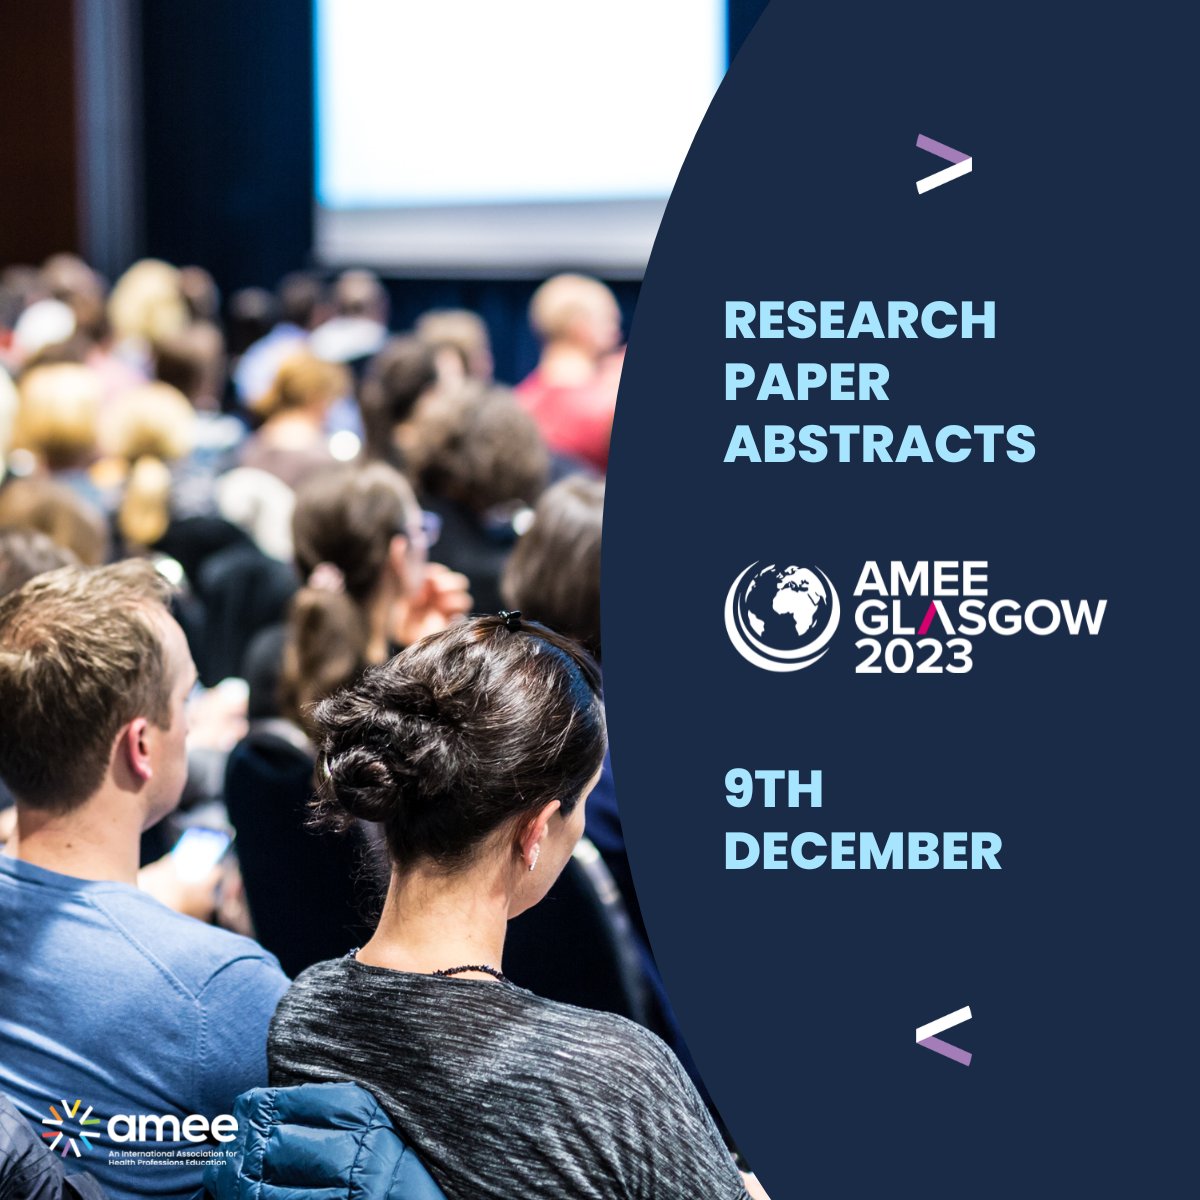 📅 Research Paper Abstract Deadline - AMEE 2023 - 9th December 📅 Submit your Research Paper abstract for consideration for a 15-minute presentation at AMEE 2023. For more information click here: ow.ly/V3La50LN8zg #AMEE2023 #GLASGOW 2023